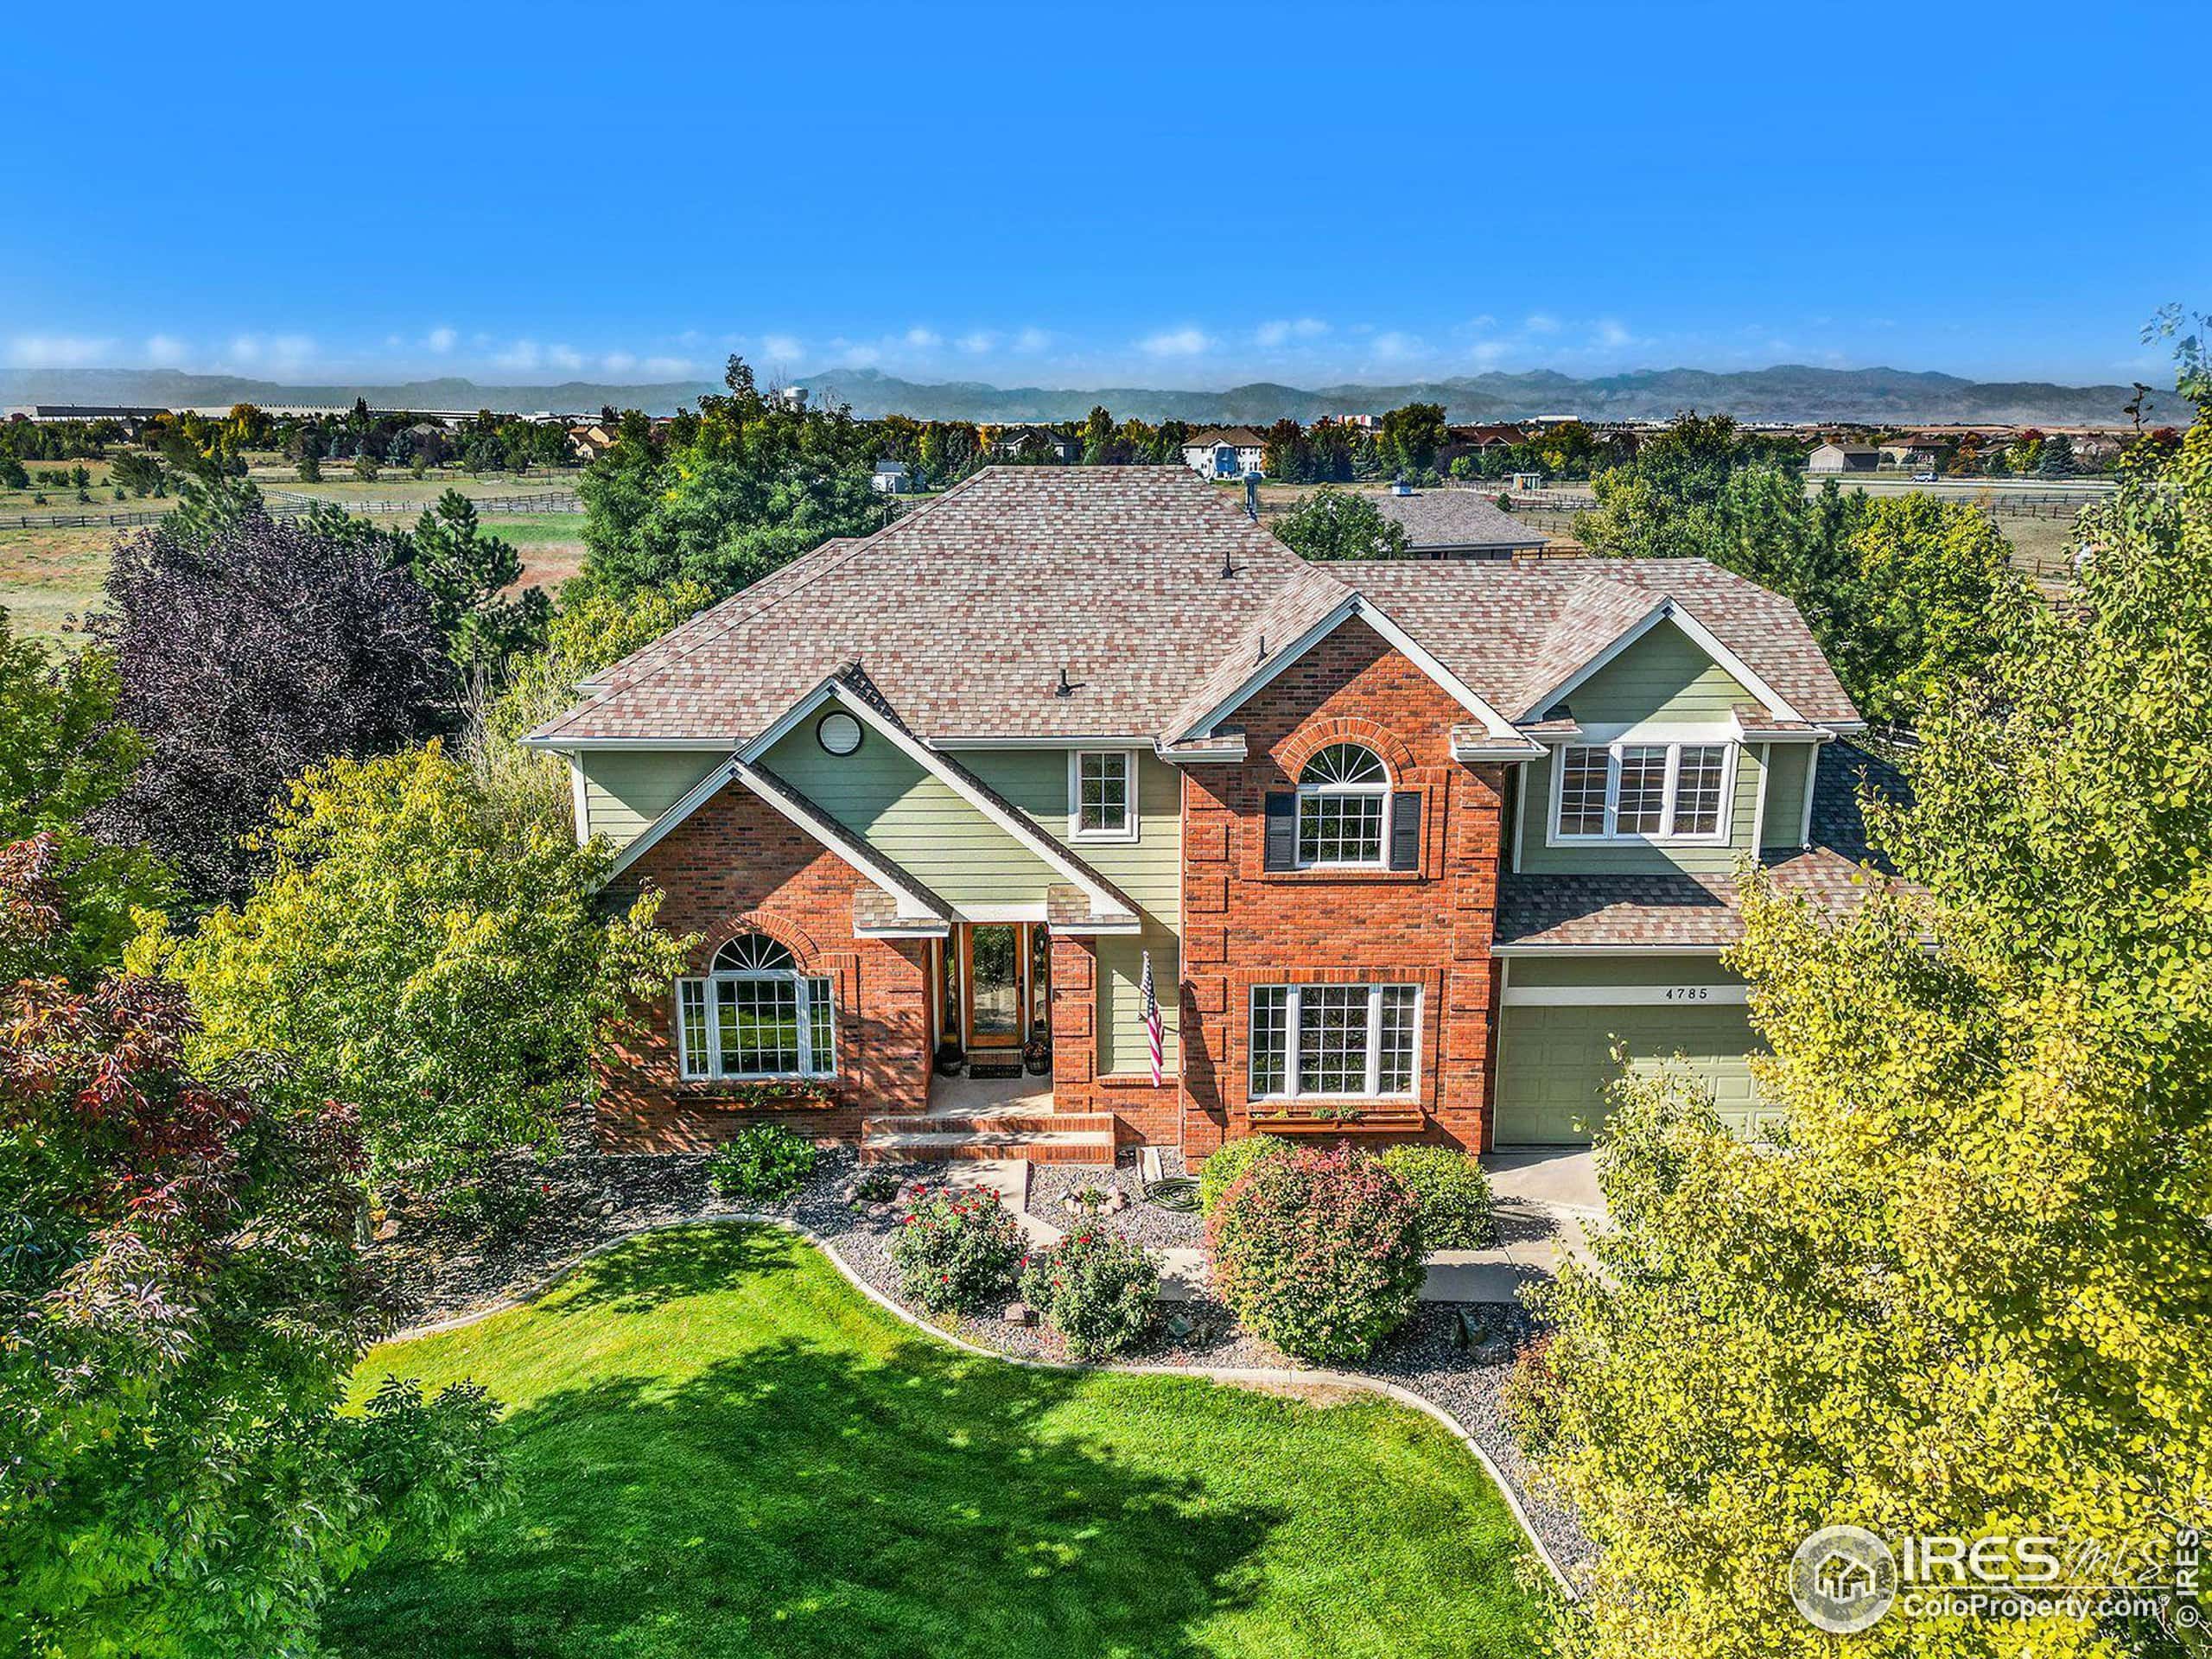 Mountain State Realty - Longmont, CO, US, agency estate